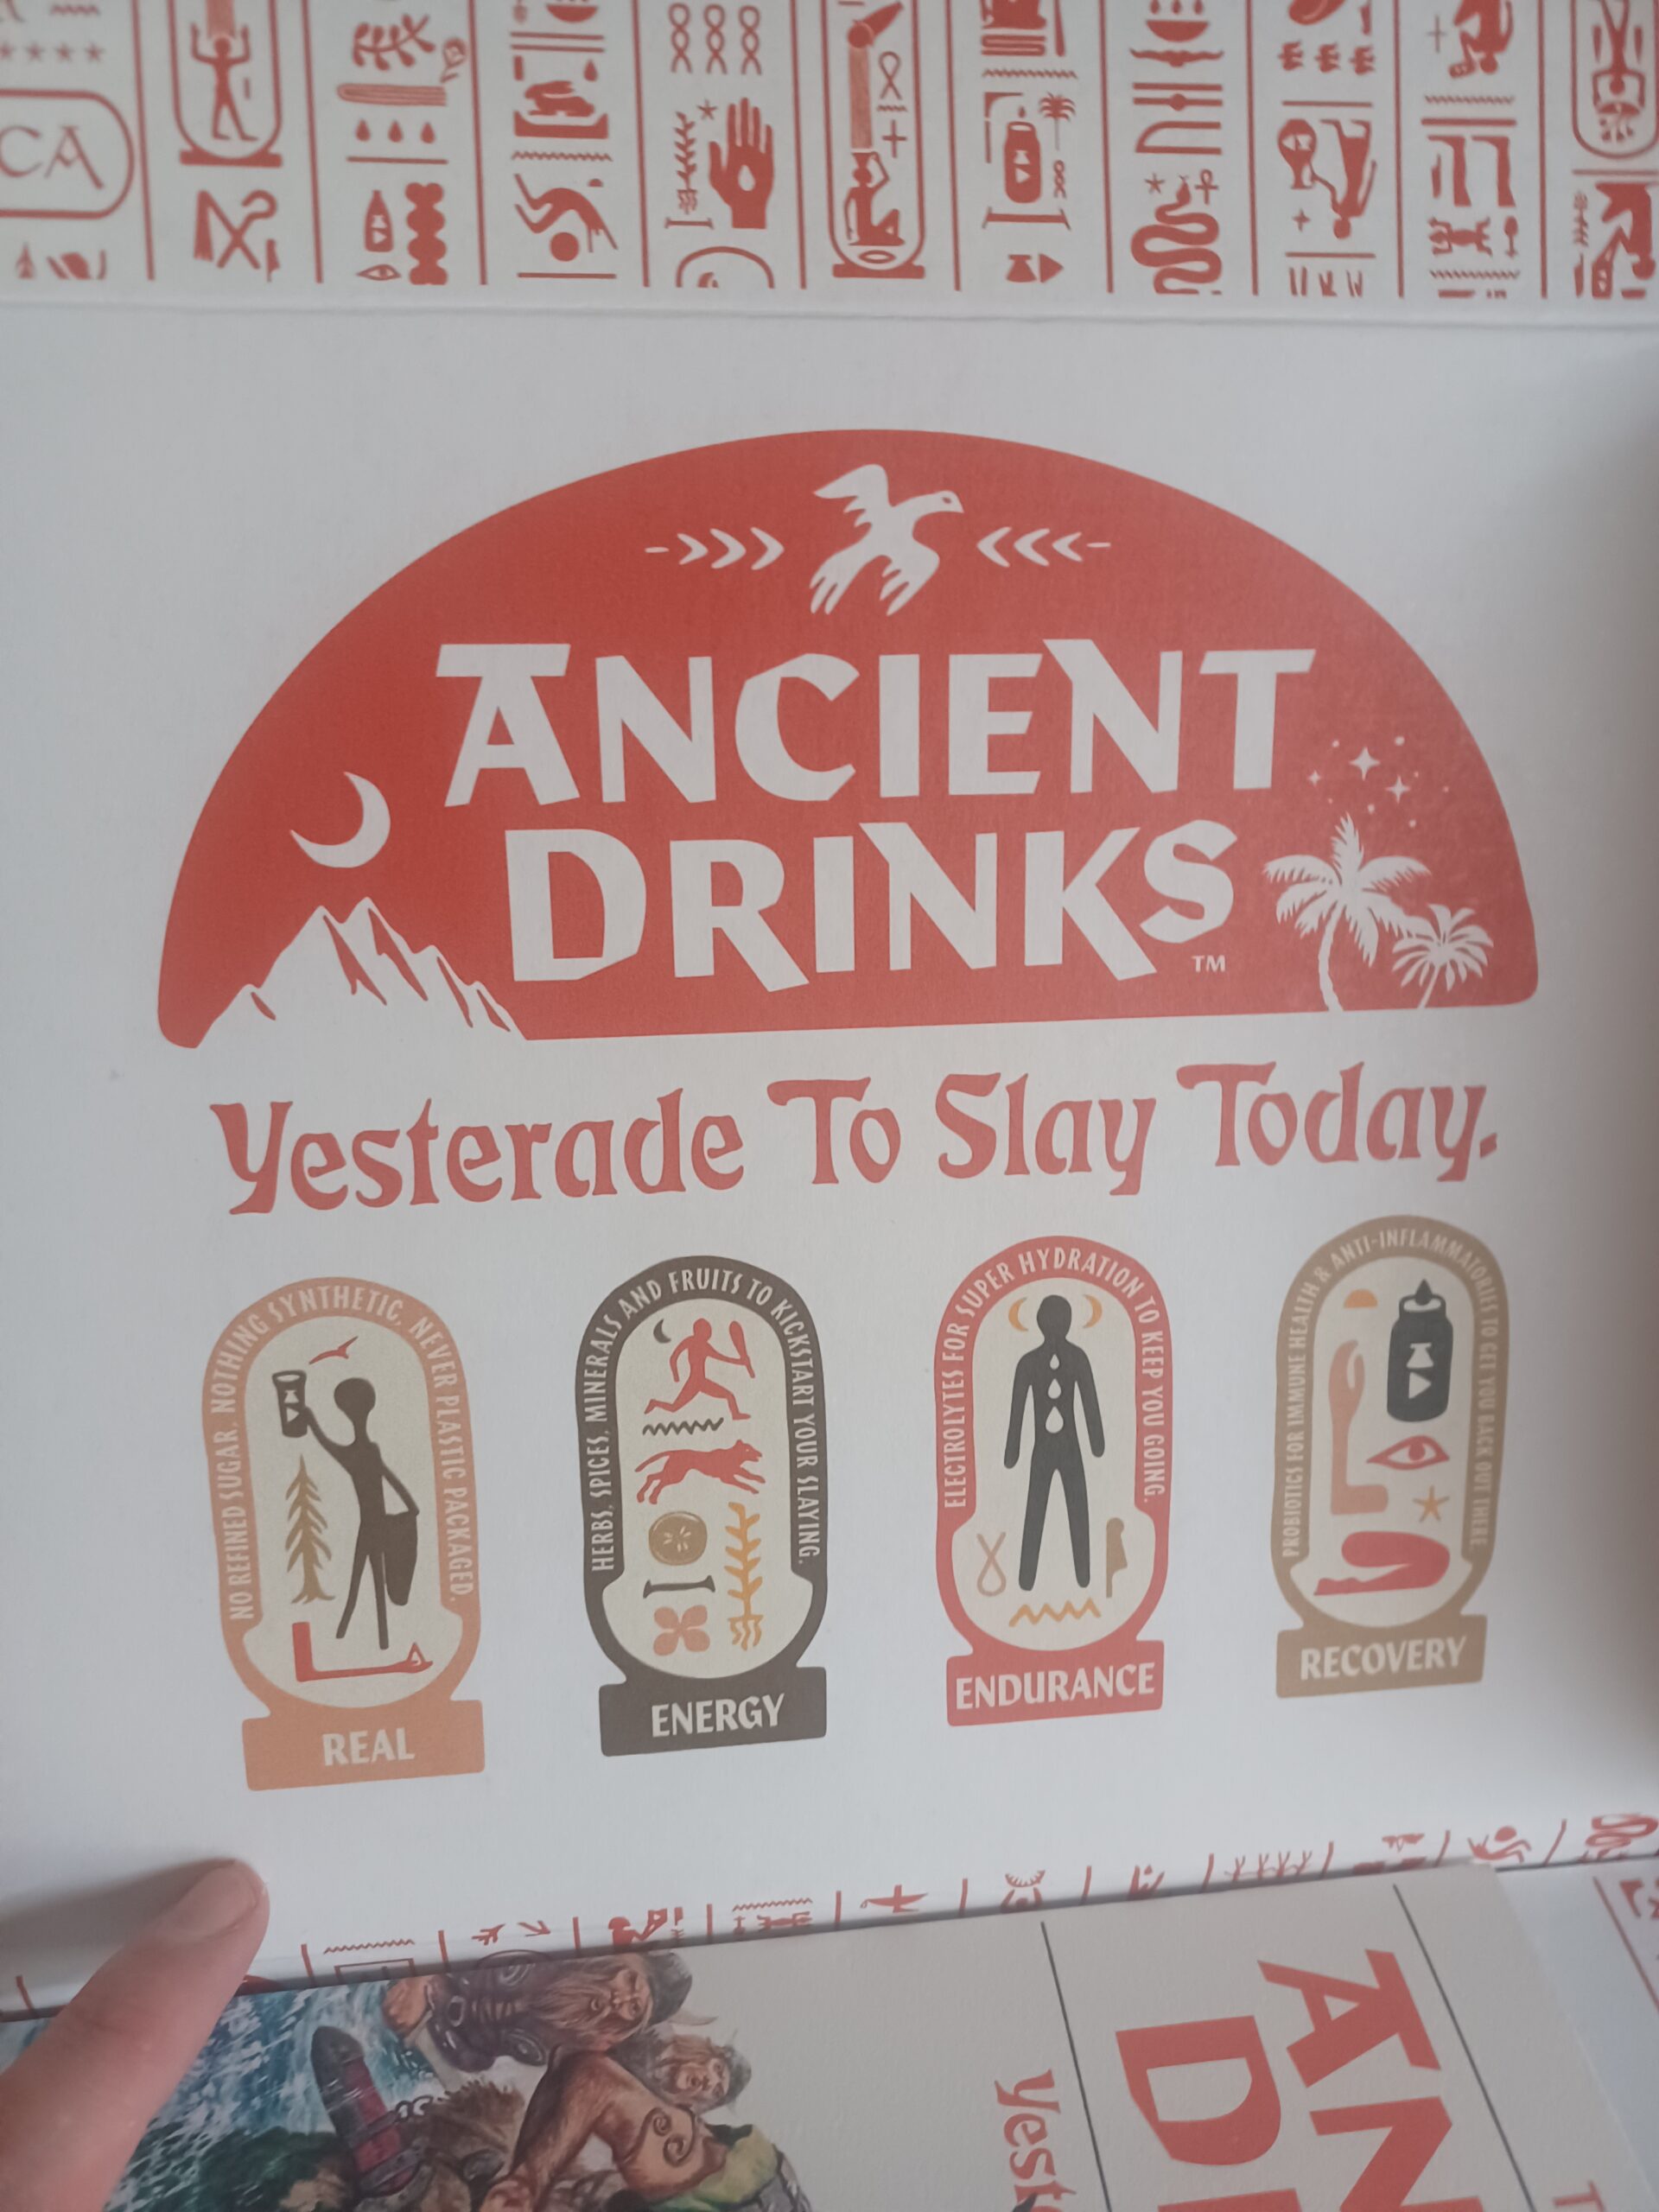 Ancient Drinks offers one of the best fermented beverages you will ever try. 